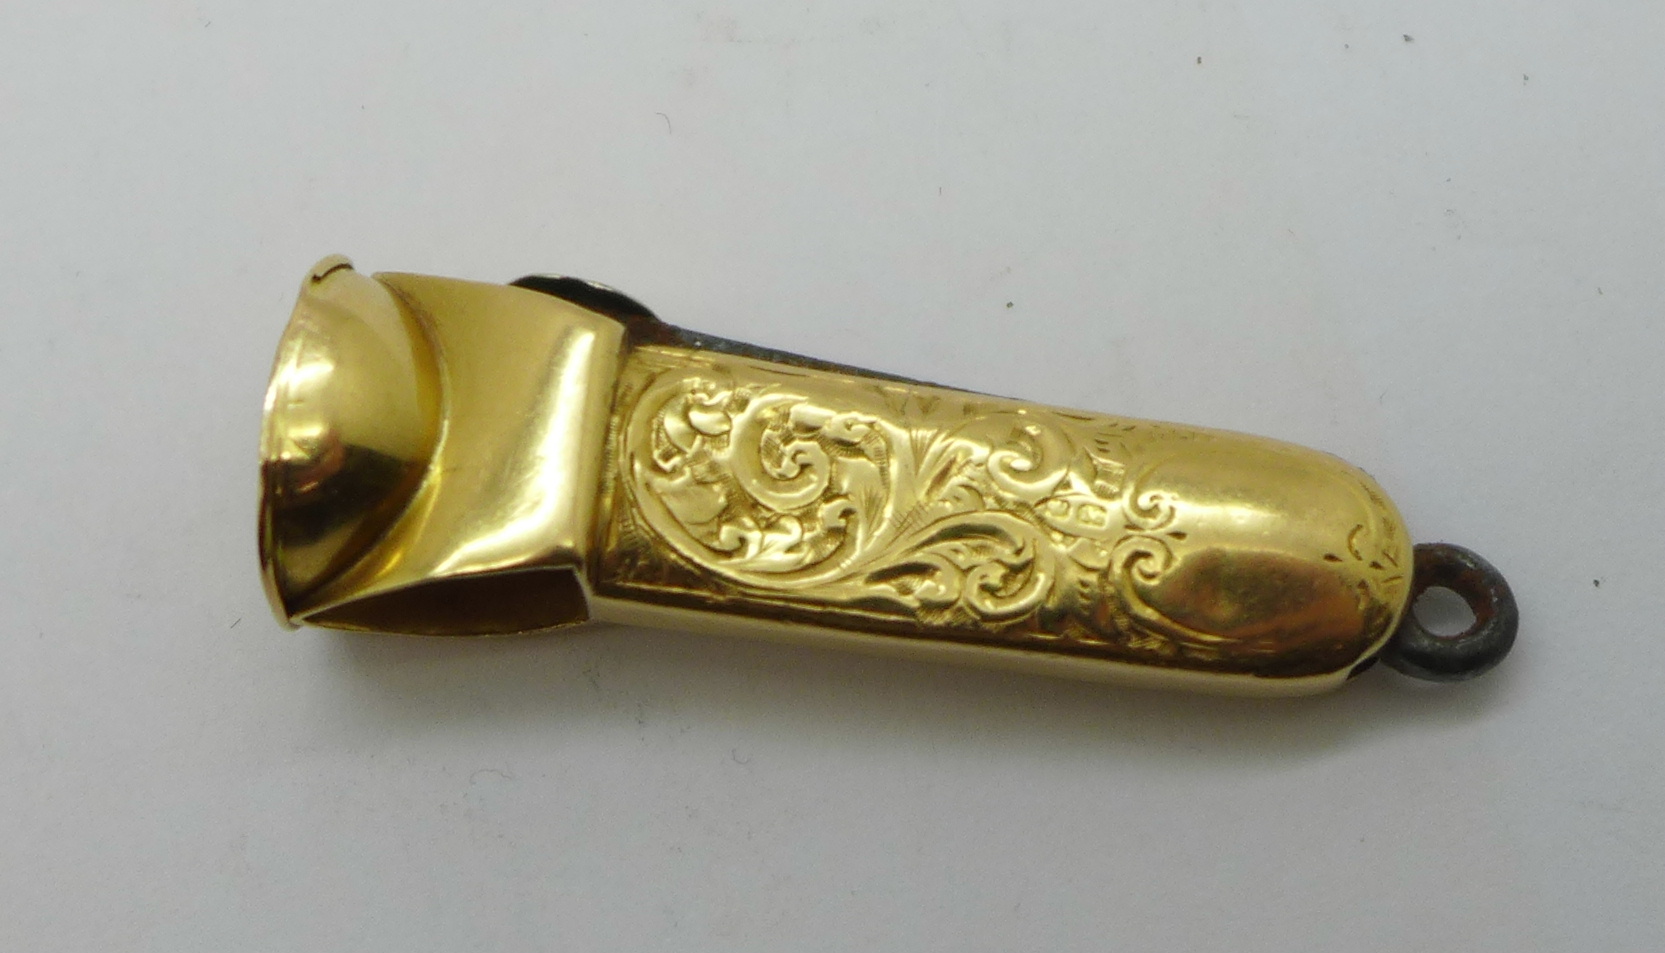 A late Victorian 18ct gold mounted cigar cutter, Birmingham 1893, maker J.A., possibly James - Image 2 of 3